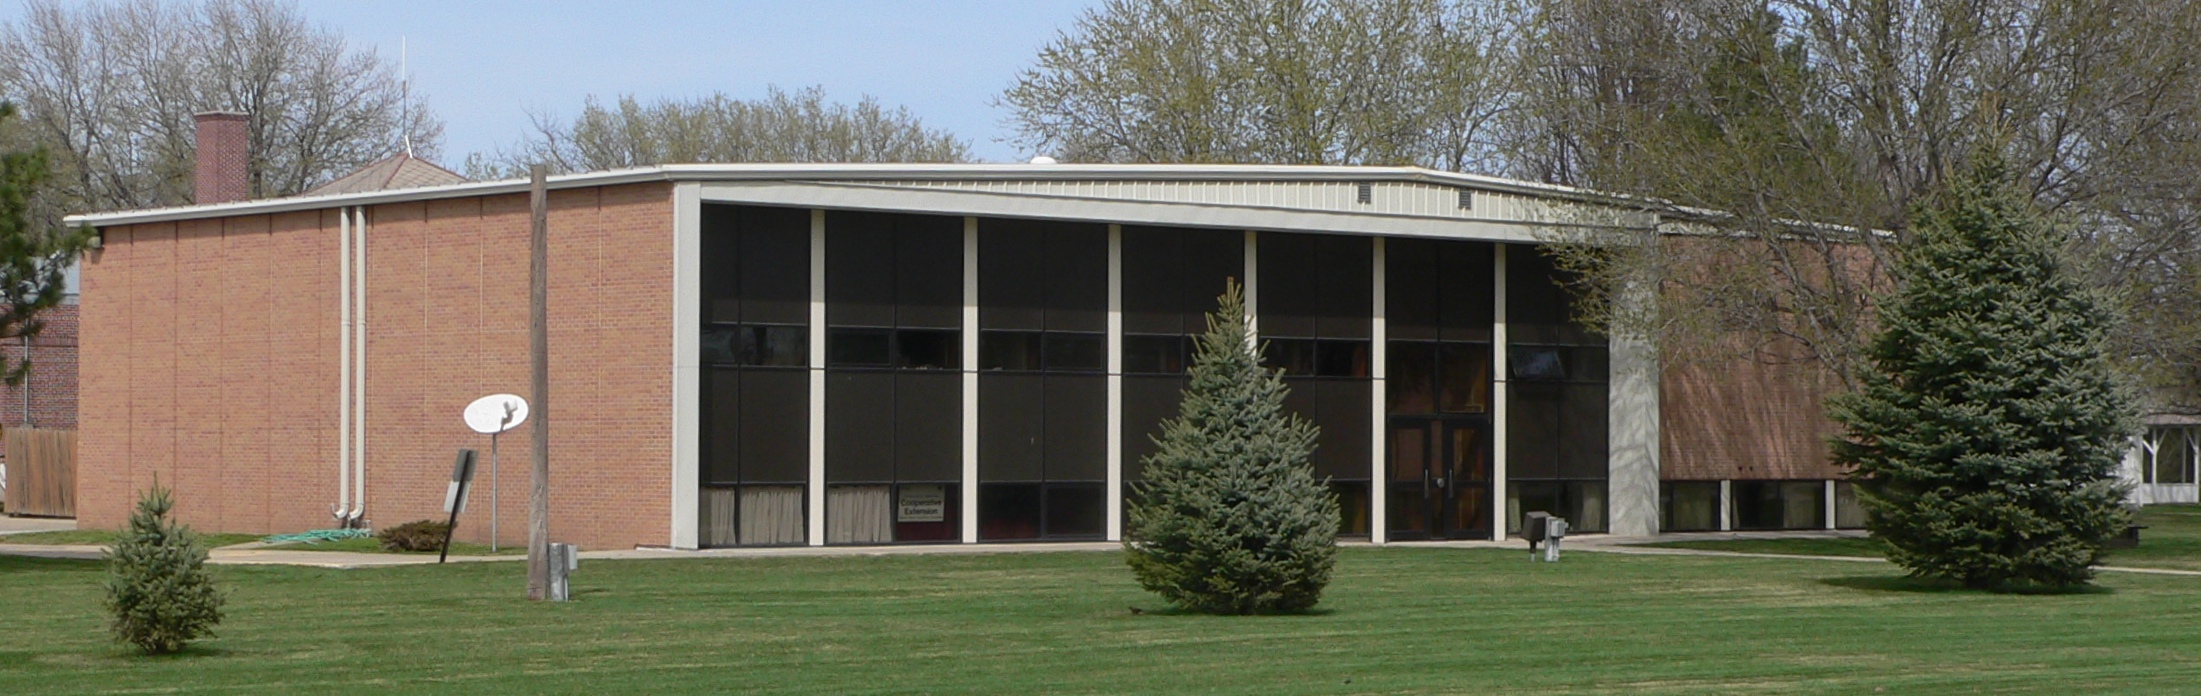 Image of County Court of Brown County